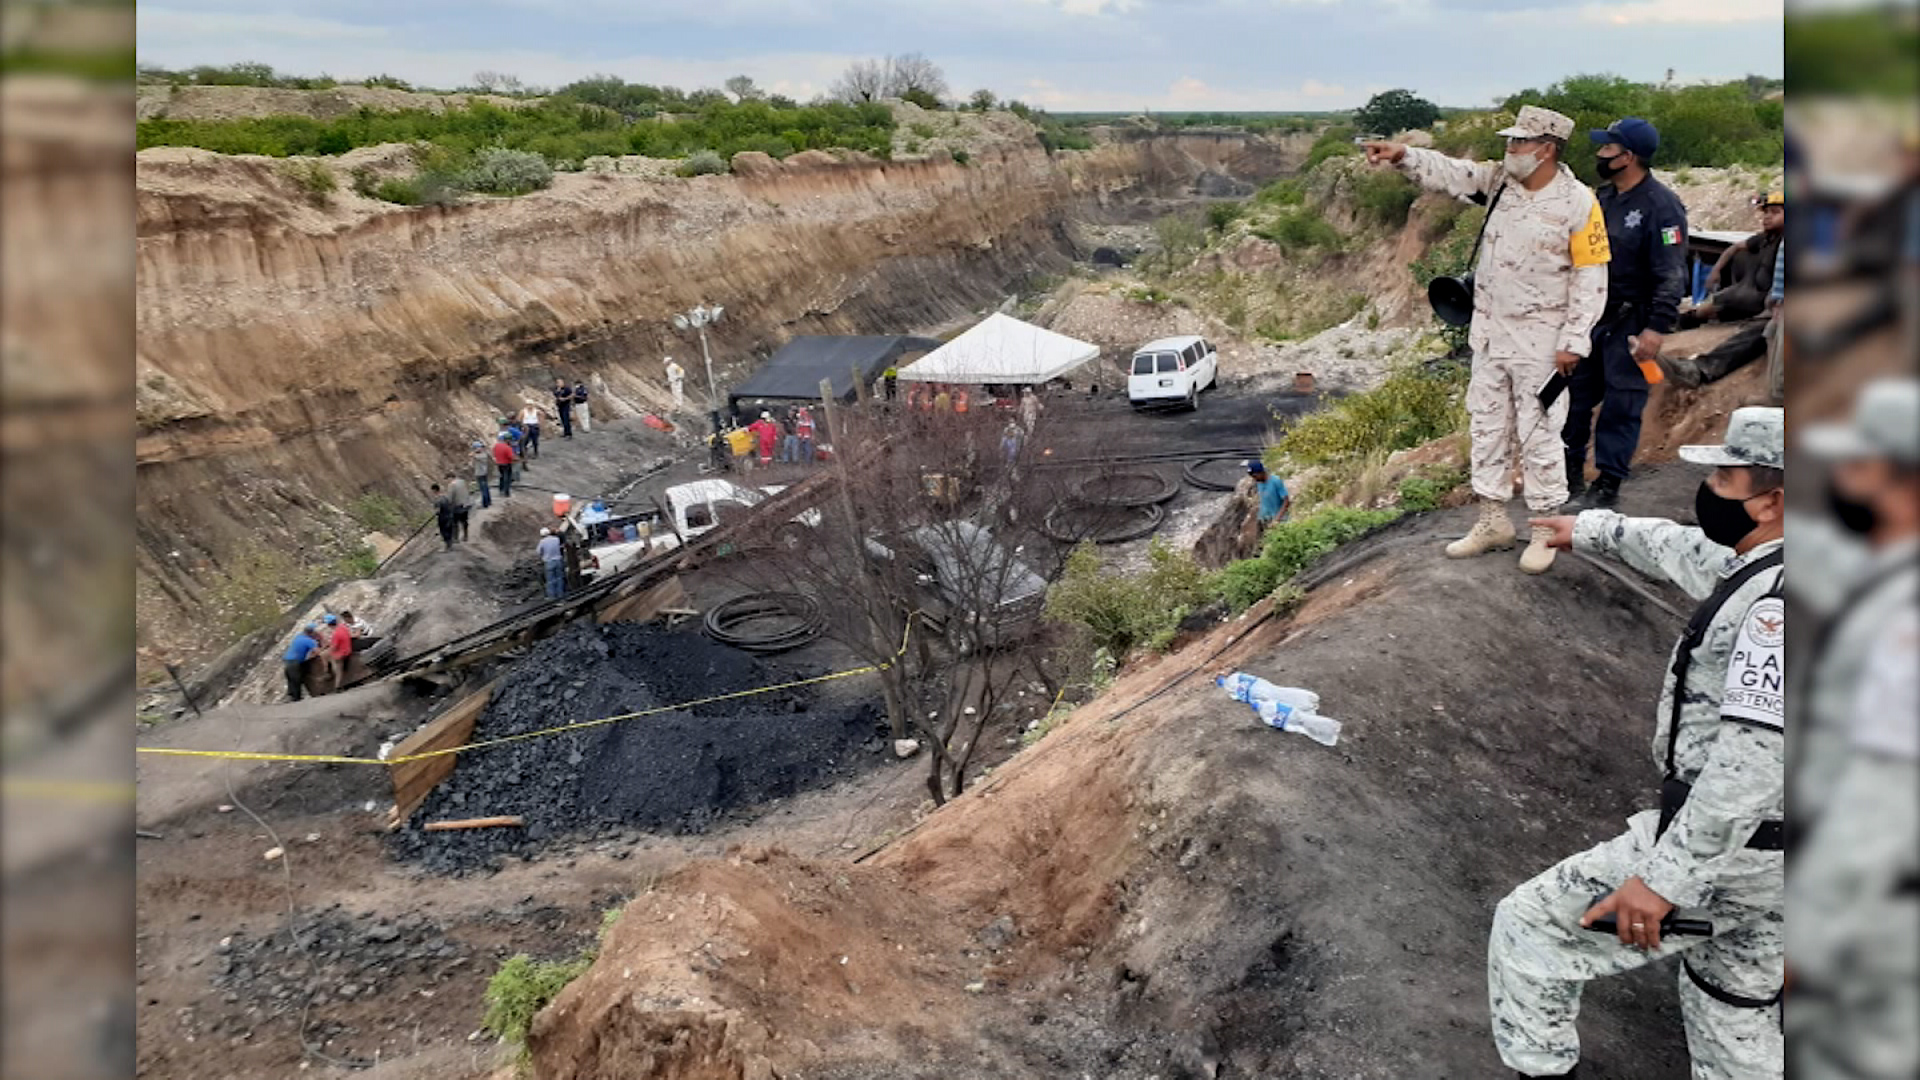 Authorities are searching for miners trapped in the collapse of the Kohuila mine